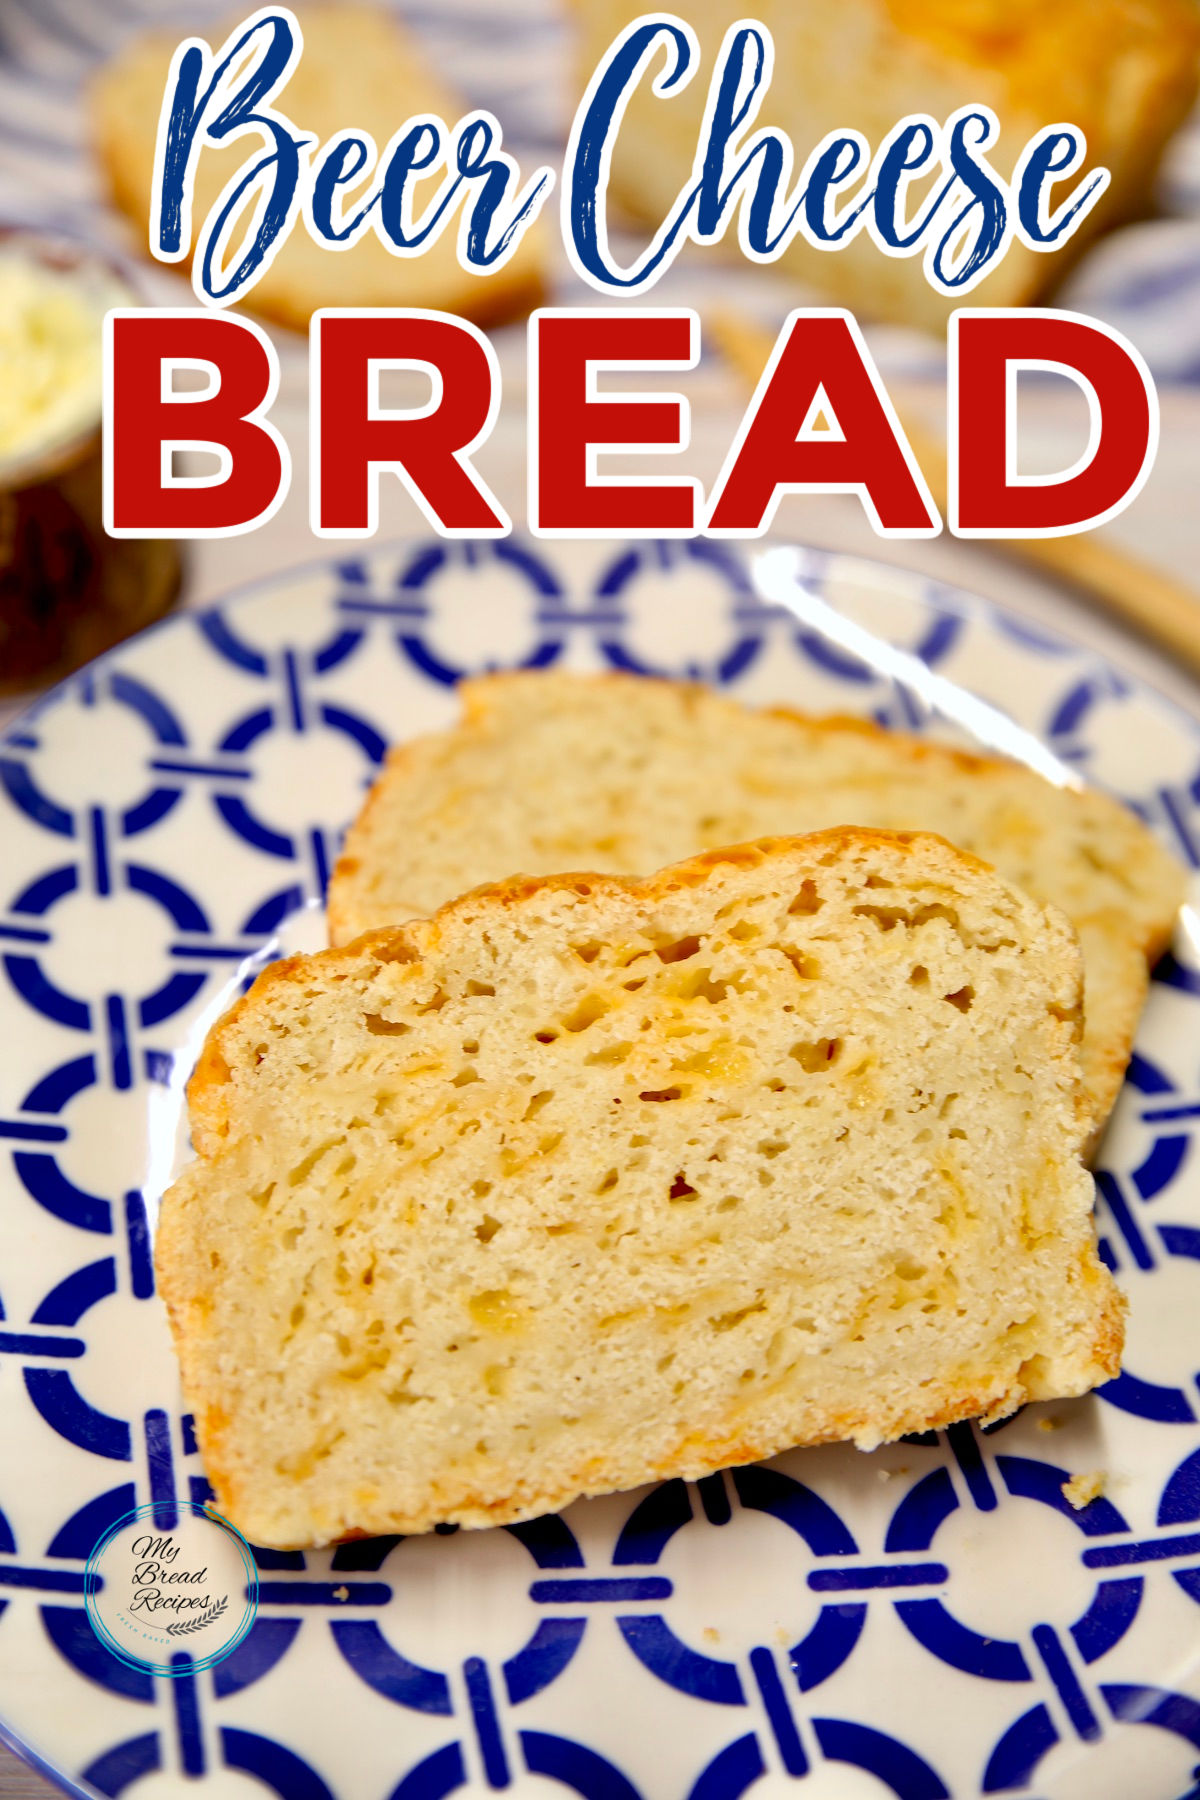 Beer cheese bread slices, text overlay.